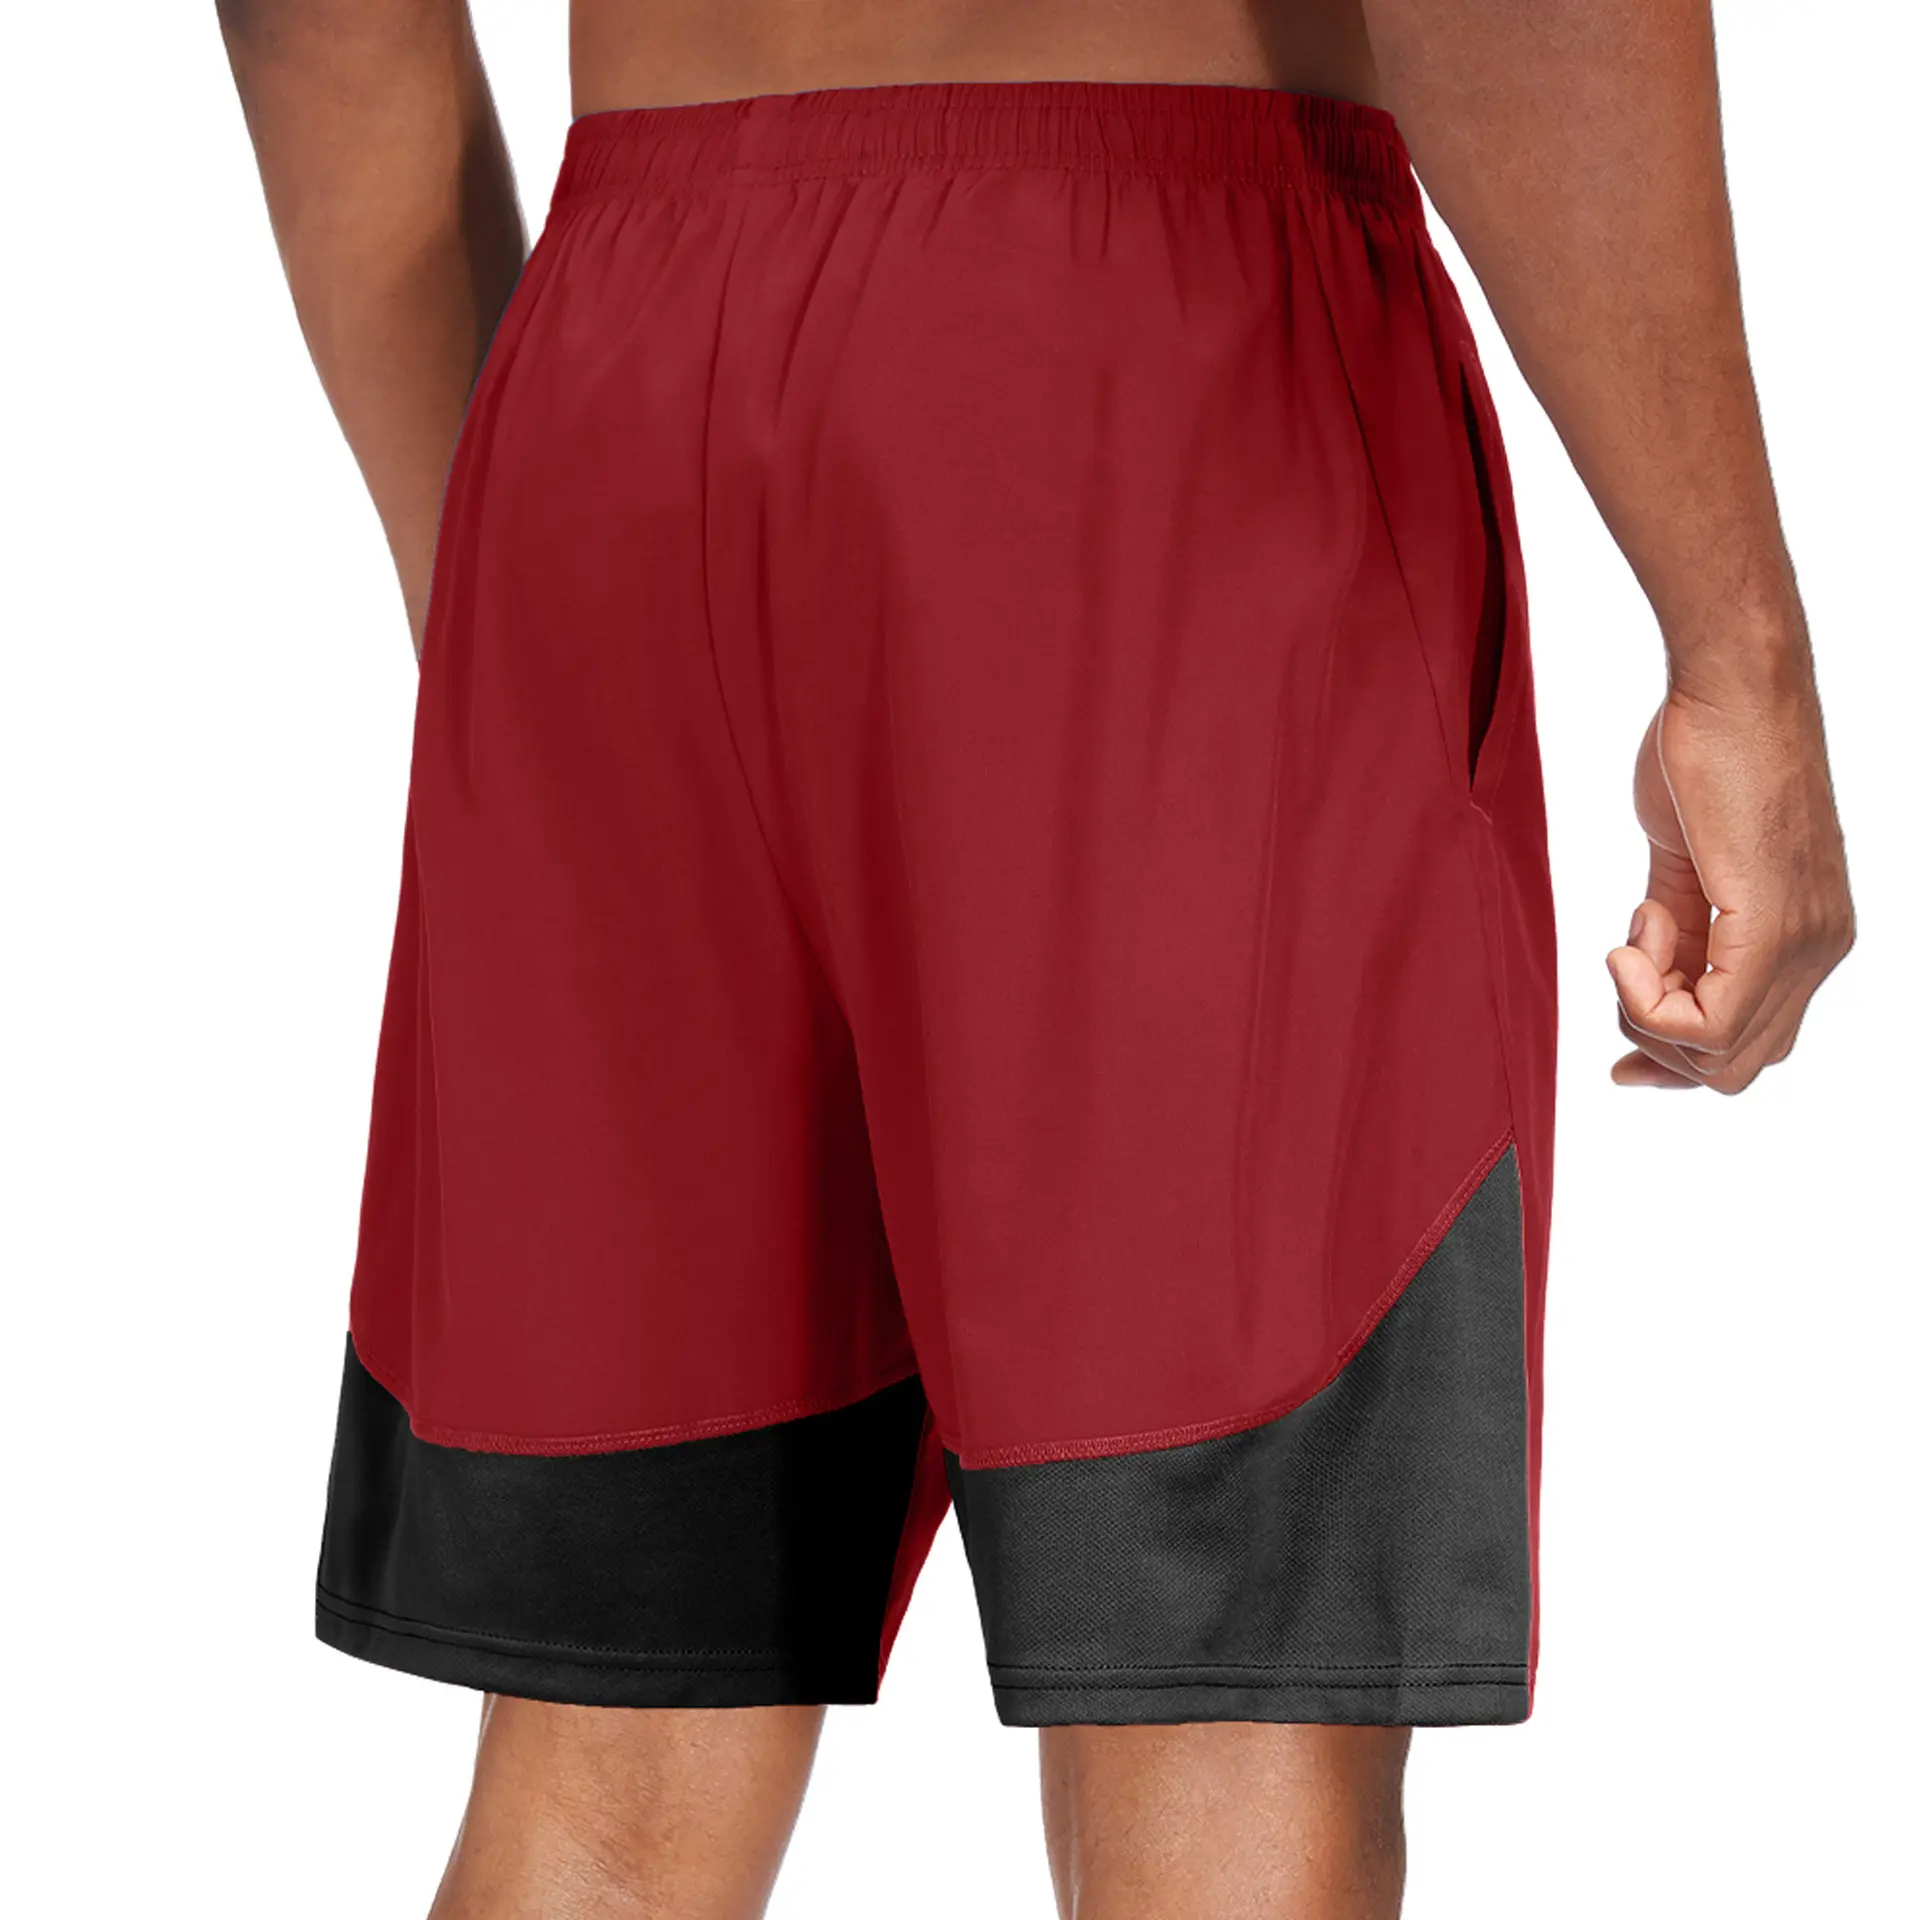 Vedo Custom Logo Polyester Quick Drying Fitness Clothes Sports Workout Short Pants Running Training Men's GYM Shorts